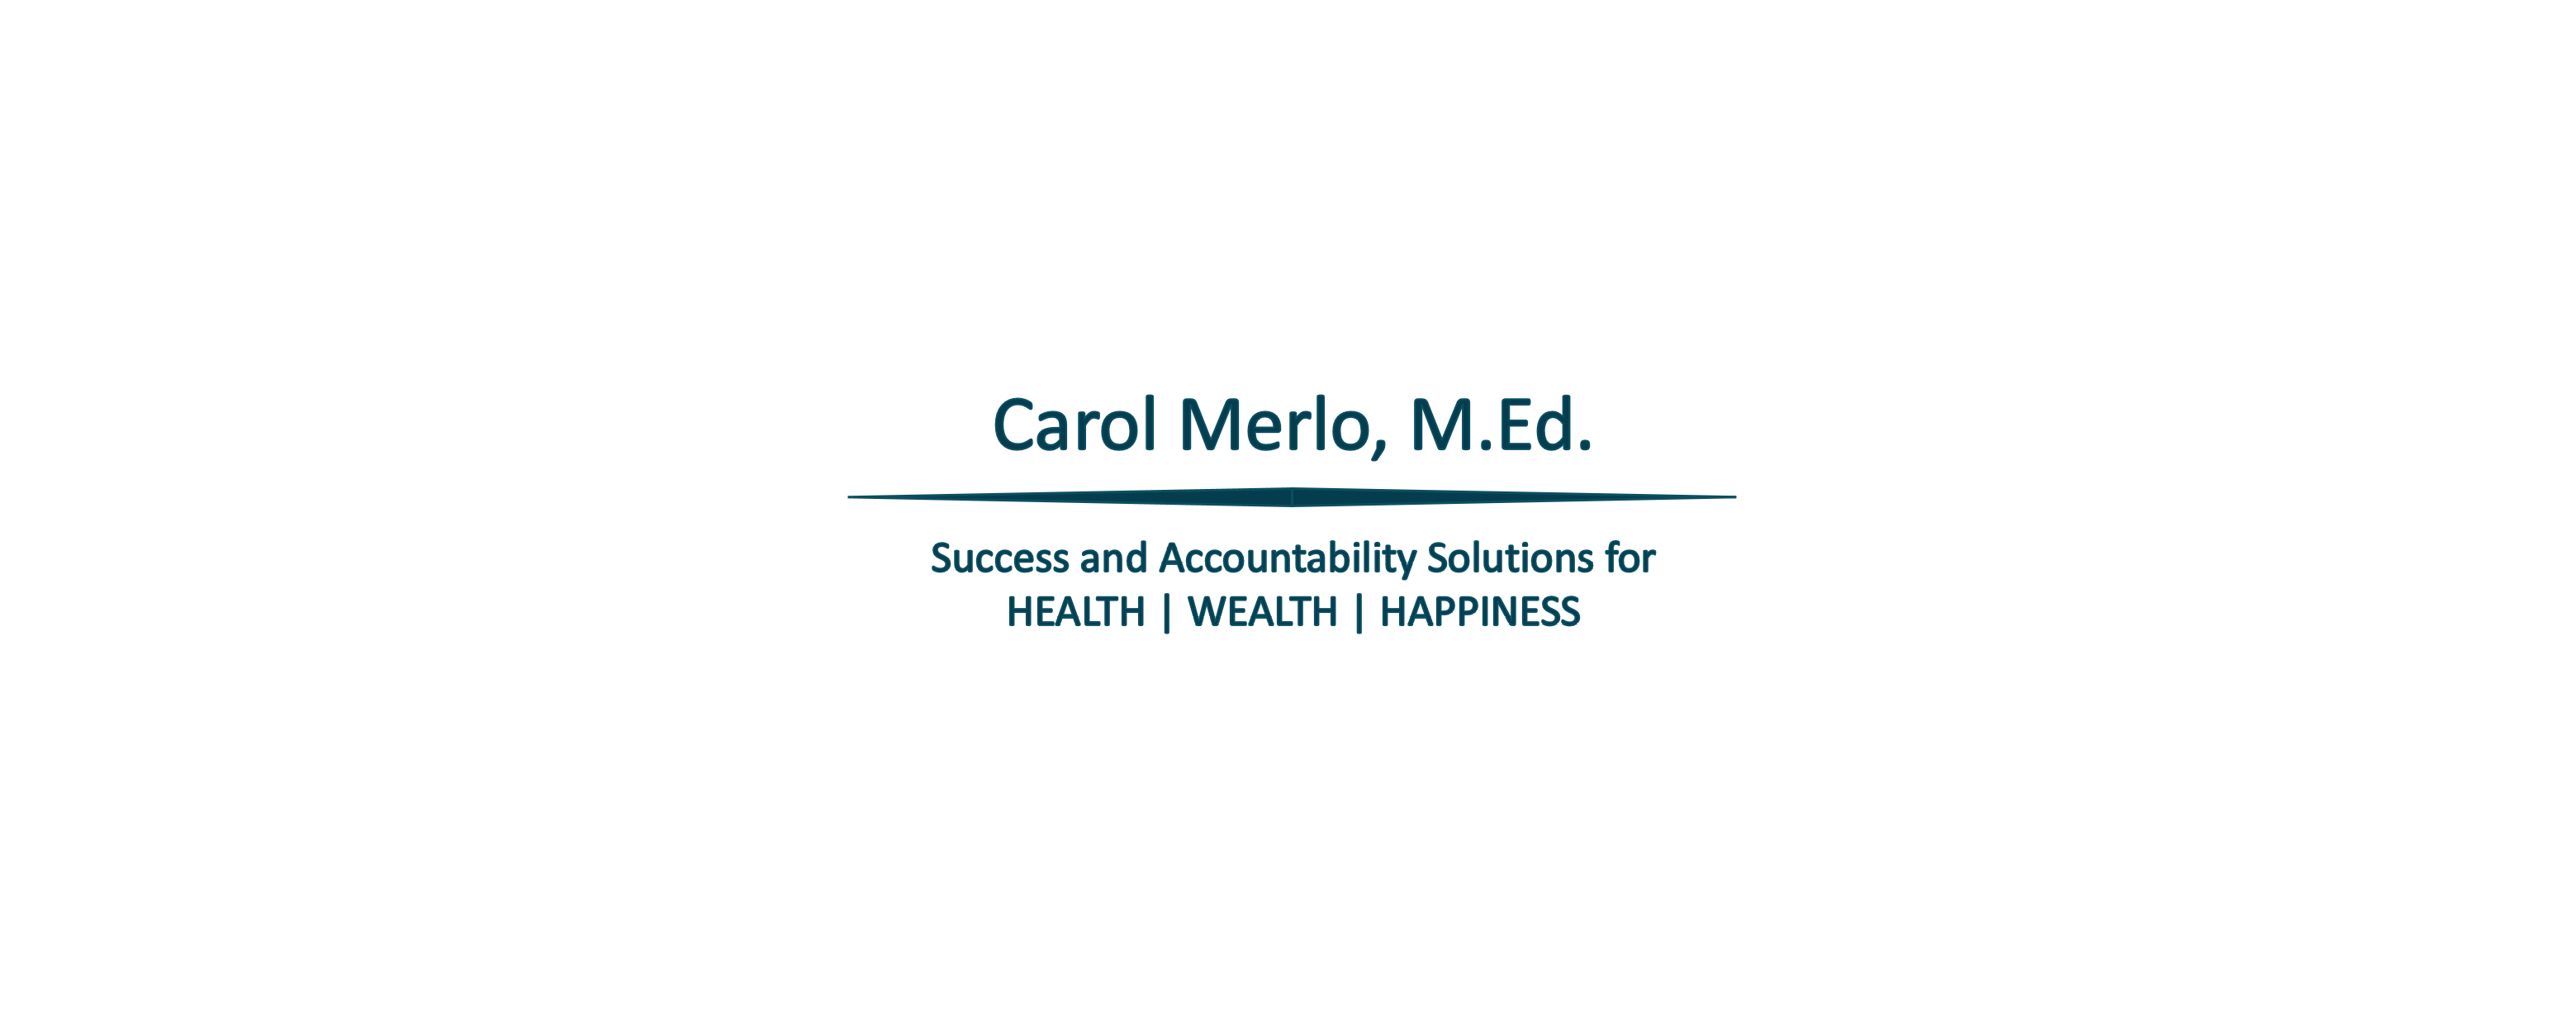 Greater Happiness Can Be Yours! - Carol Merlo